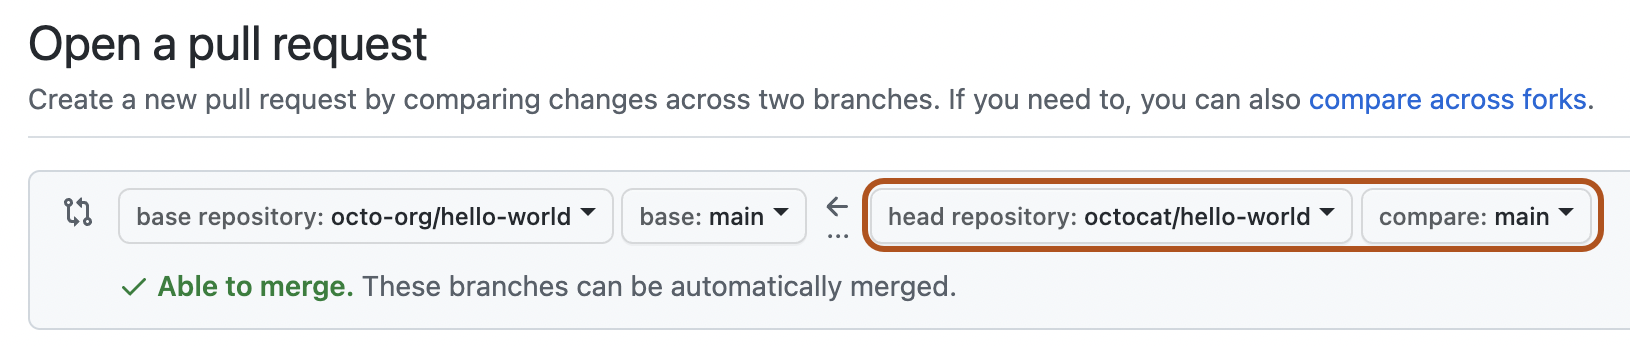 Screenshot of the page to open a new pull request. The dropdown menus for choosing the head repository and compare branch are outlined in dark orange.